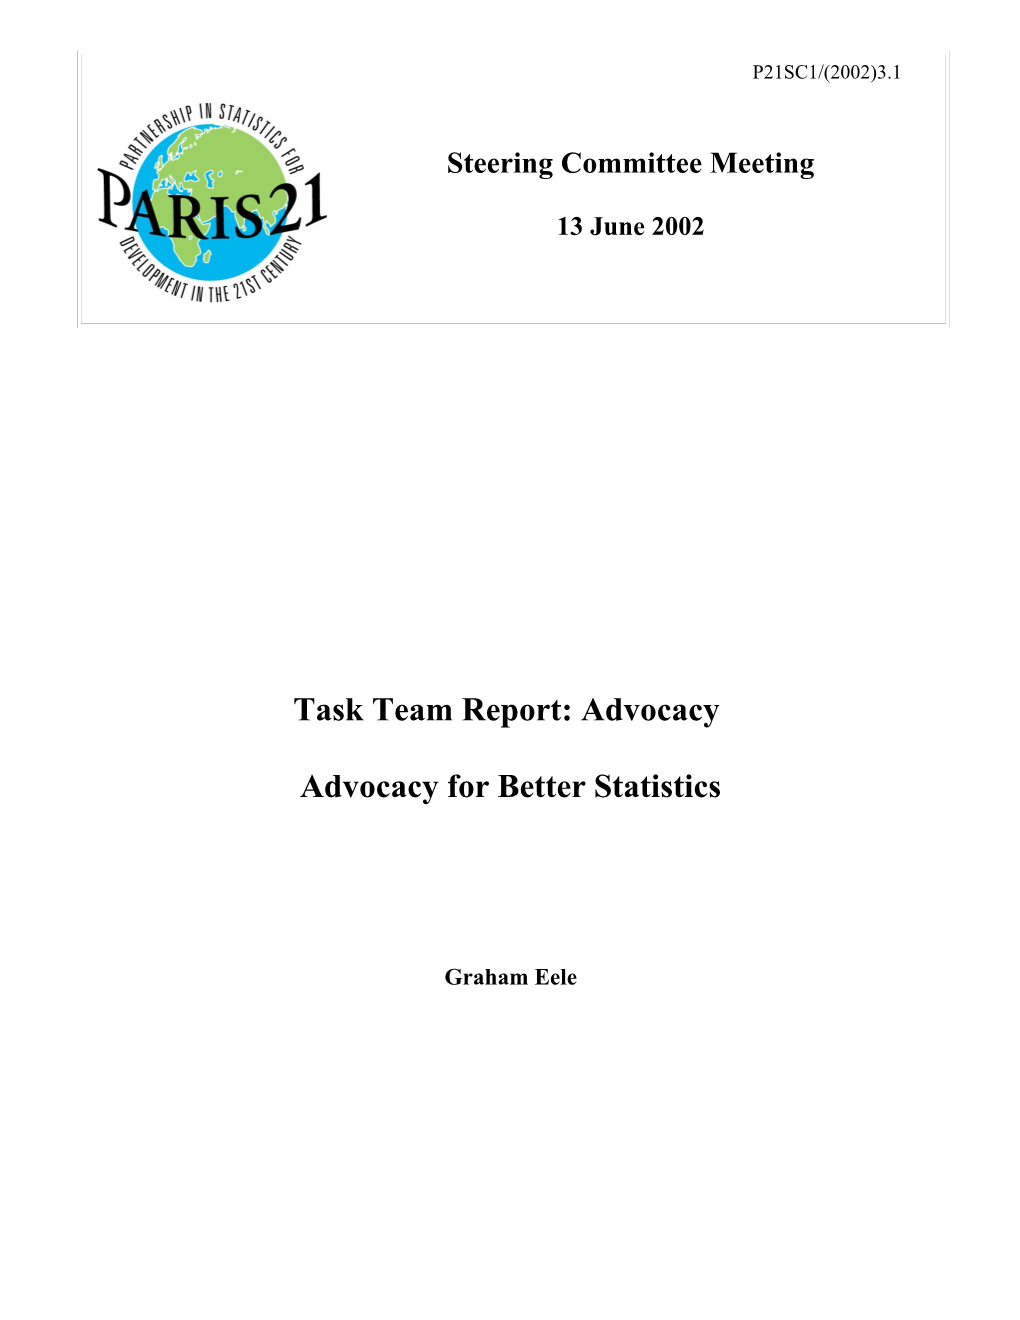 Advocacy for Better Statistics